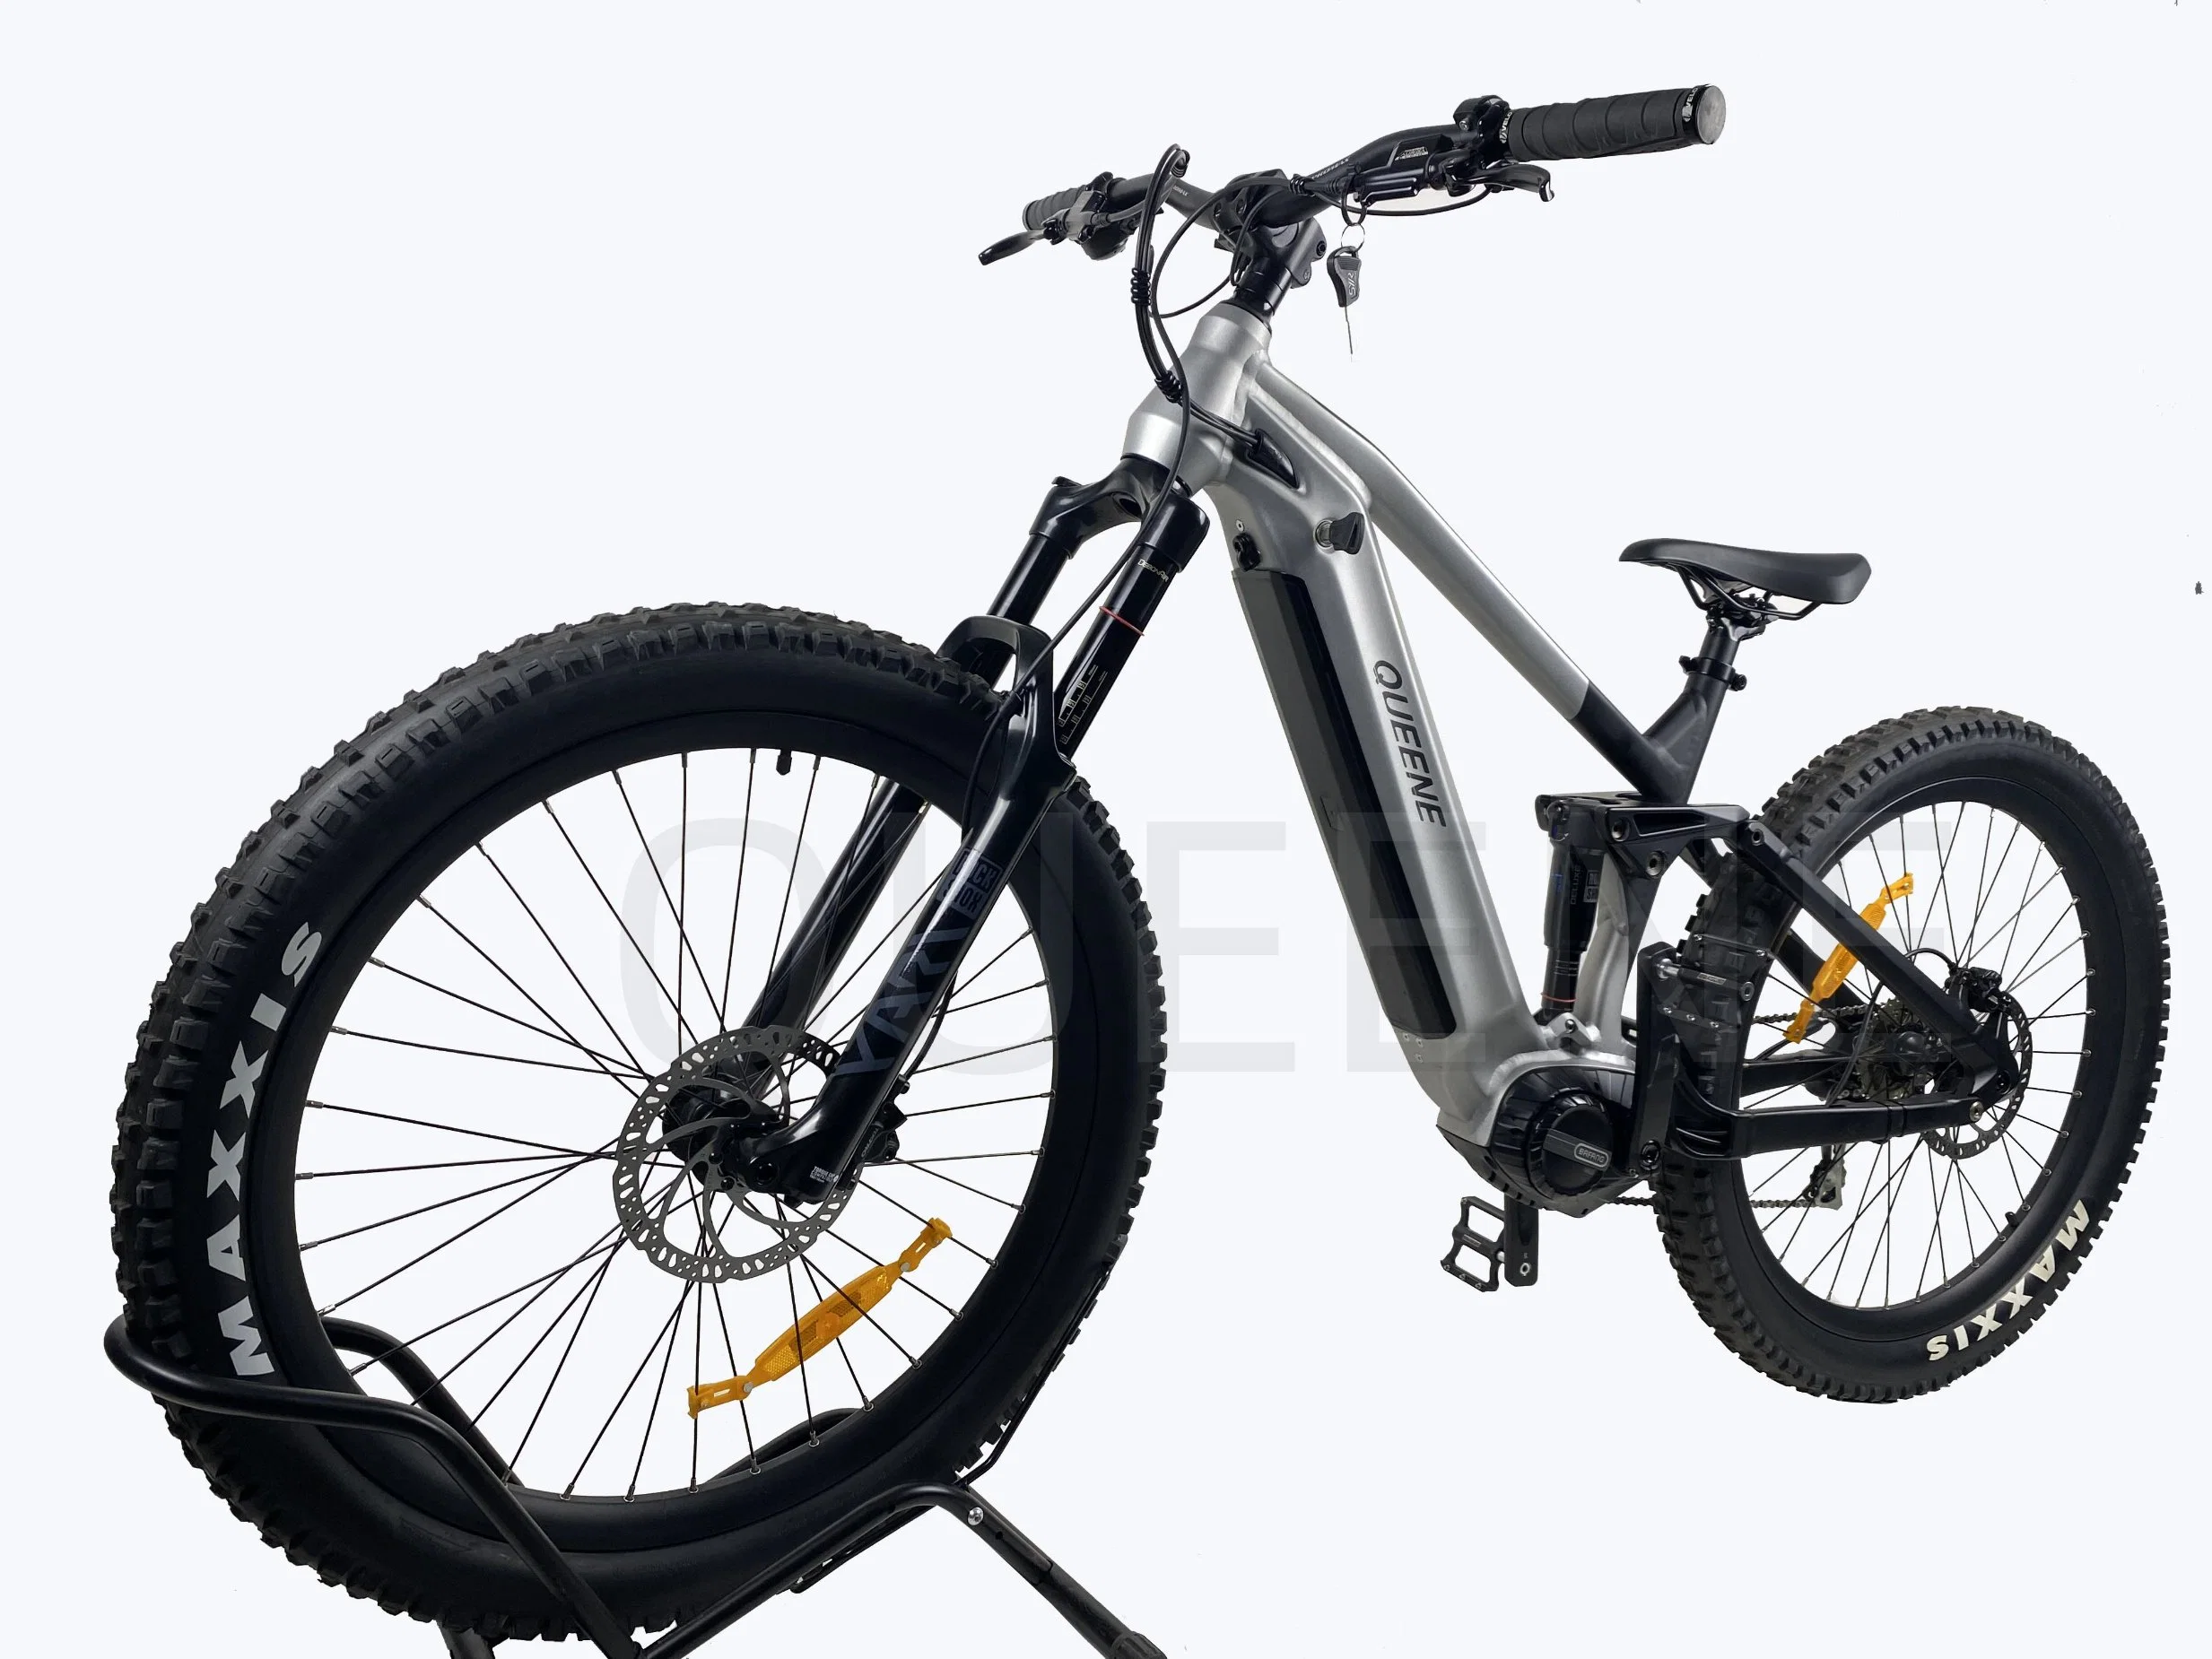 48V 500W MID Drive Motor Electric City Bike Cycling Electric Bicycle